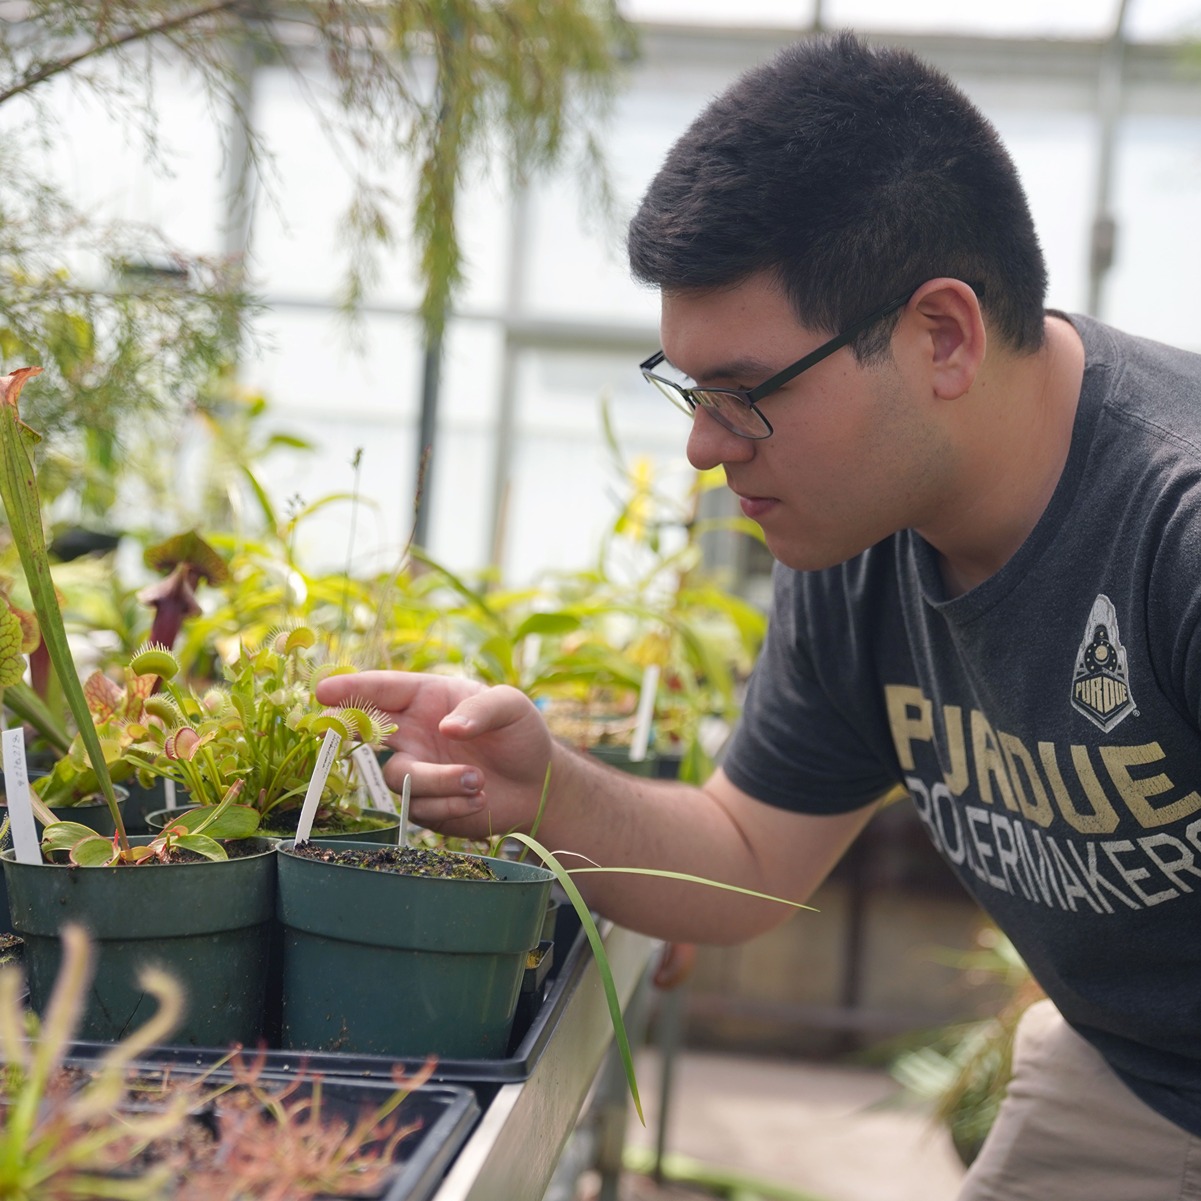 Jonathan Lu tends to a plant he is studying in the Lilly Greenhouses.